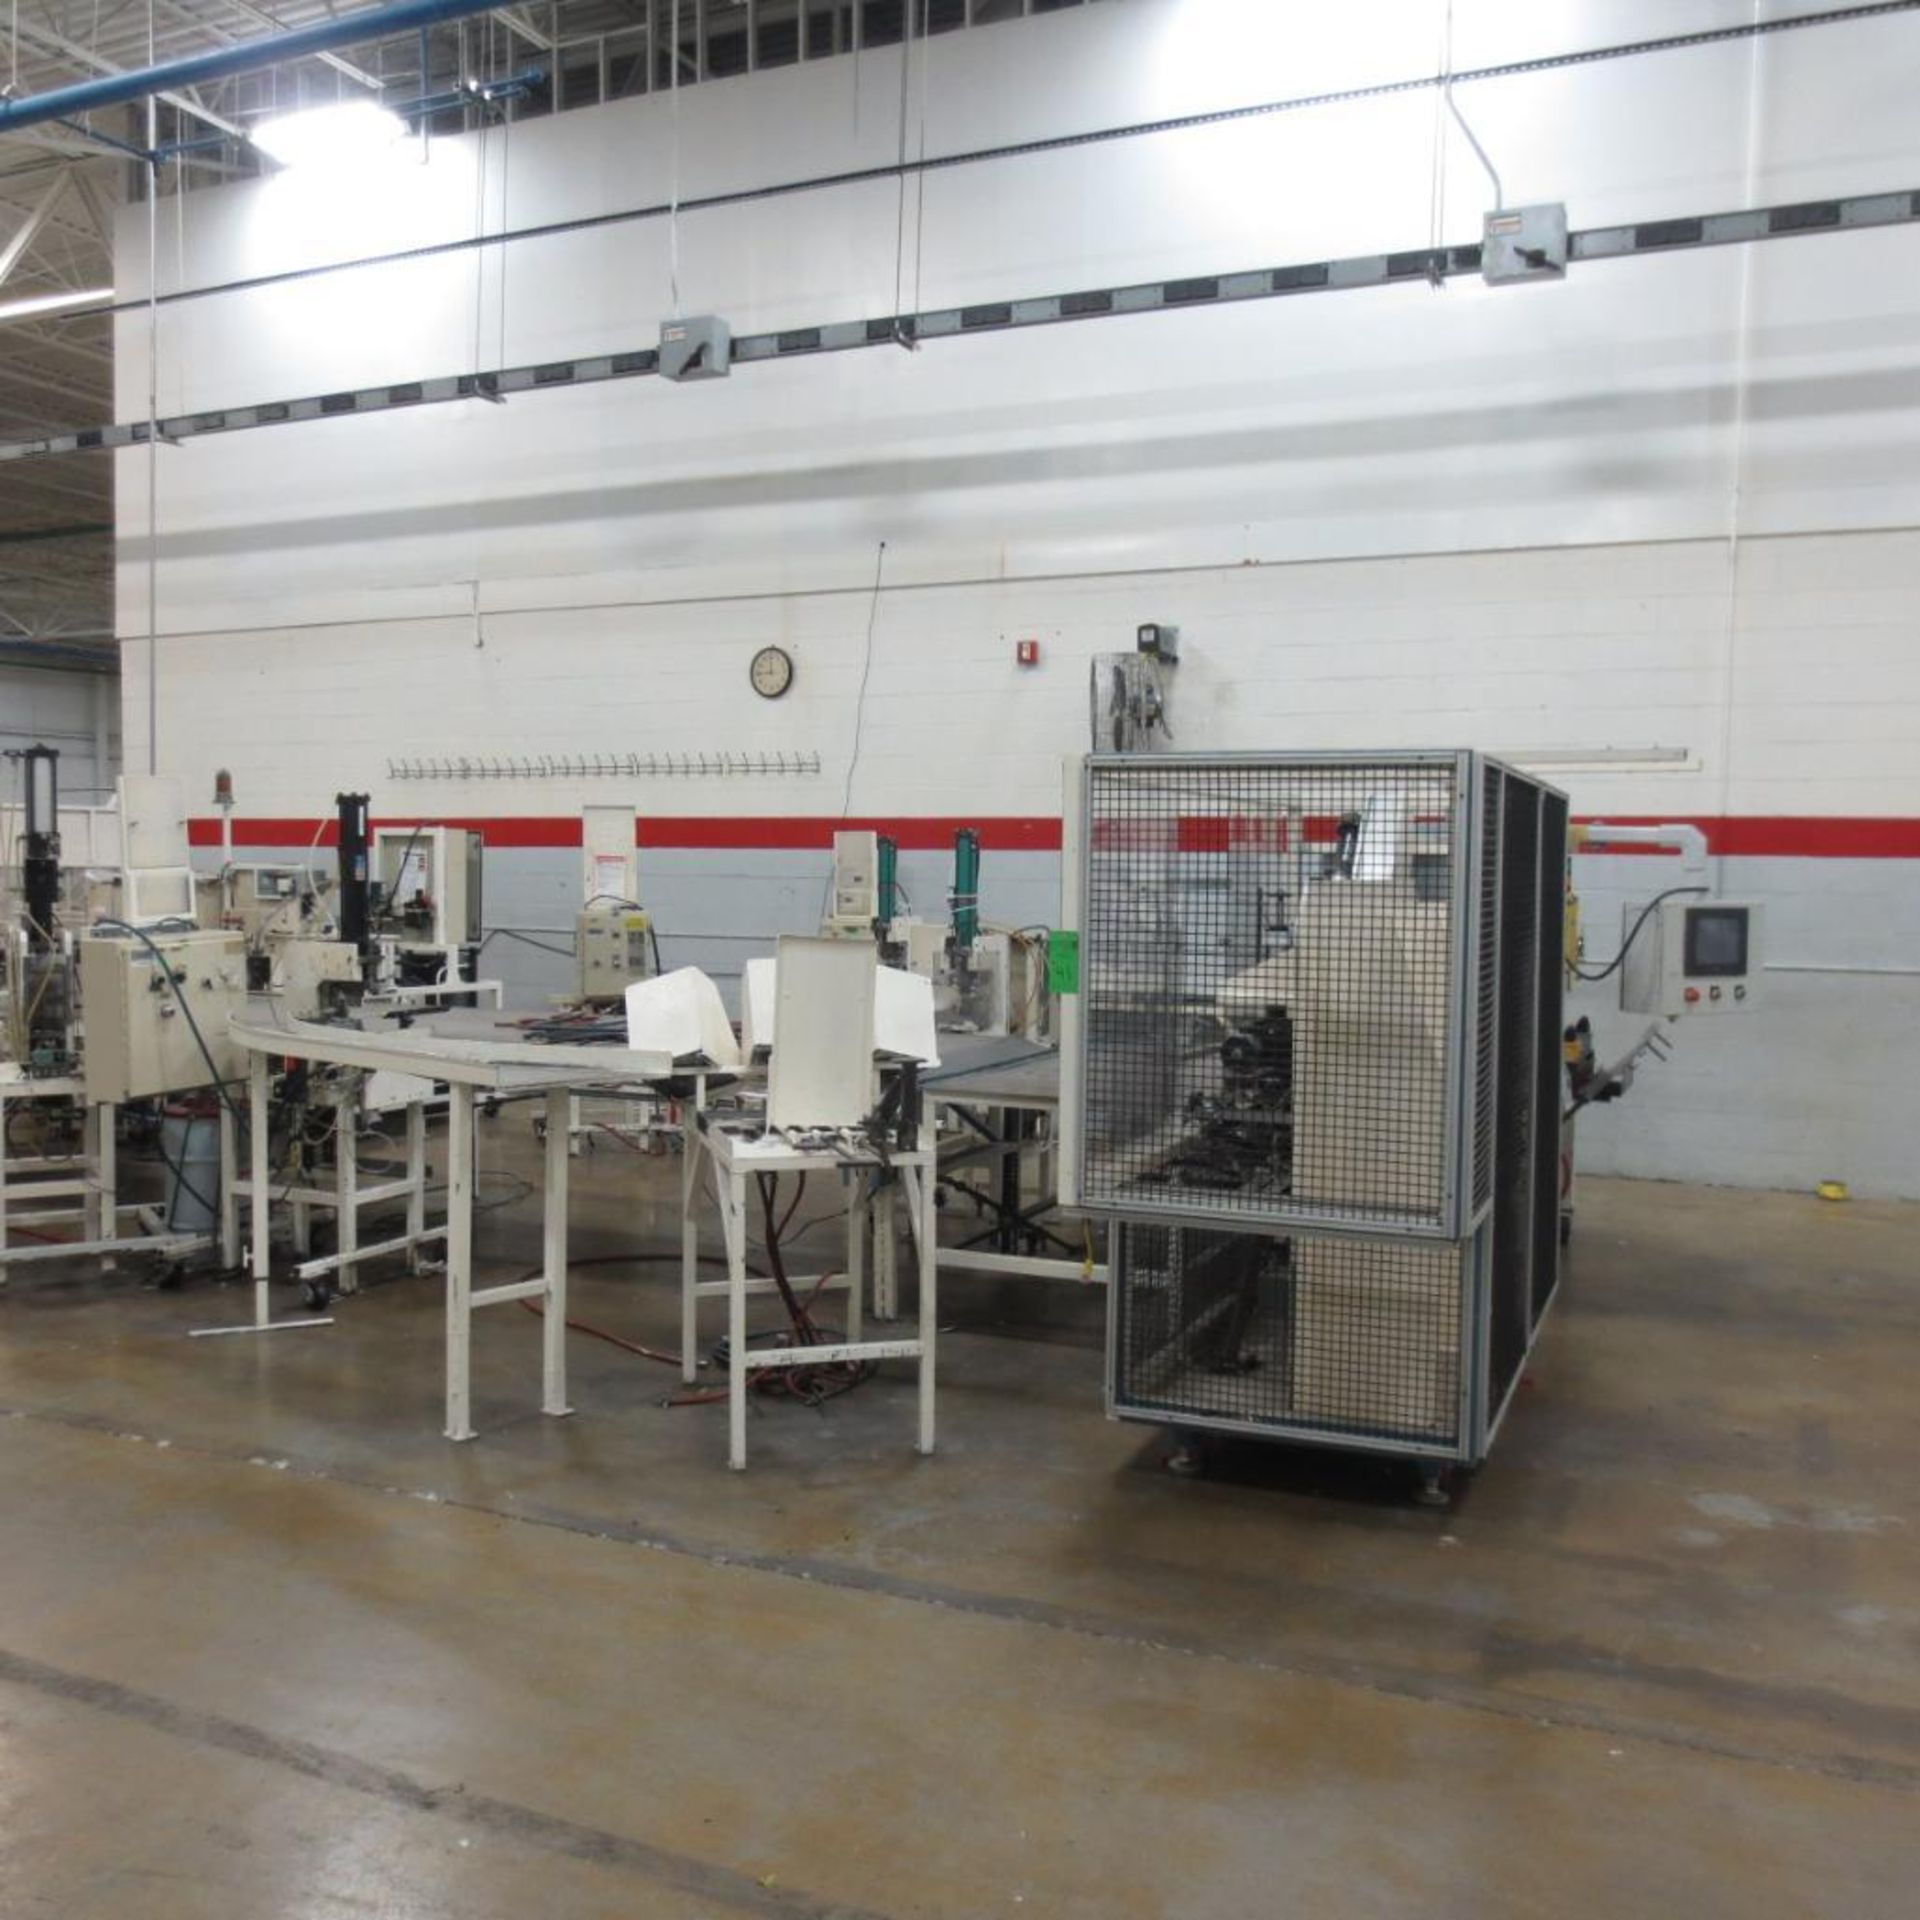 Work Cell Consisting of 4 Press Units, Bend Tube Machine, Belisle Tube Bender, 2 Button Machine and - Image 2 of 19